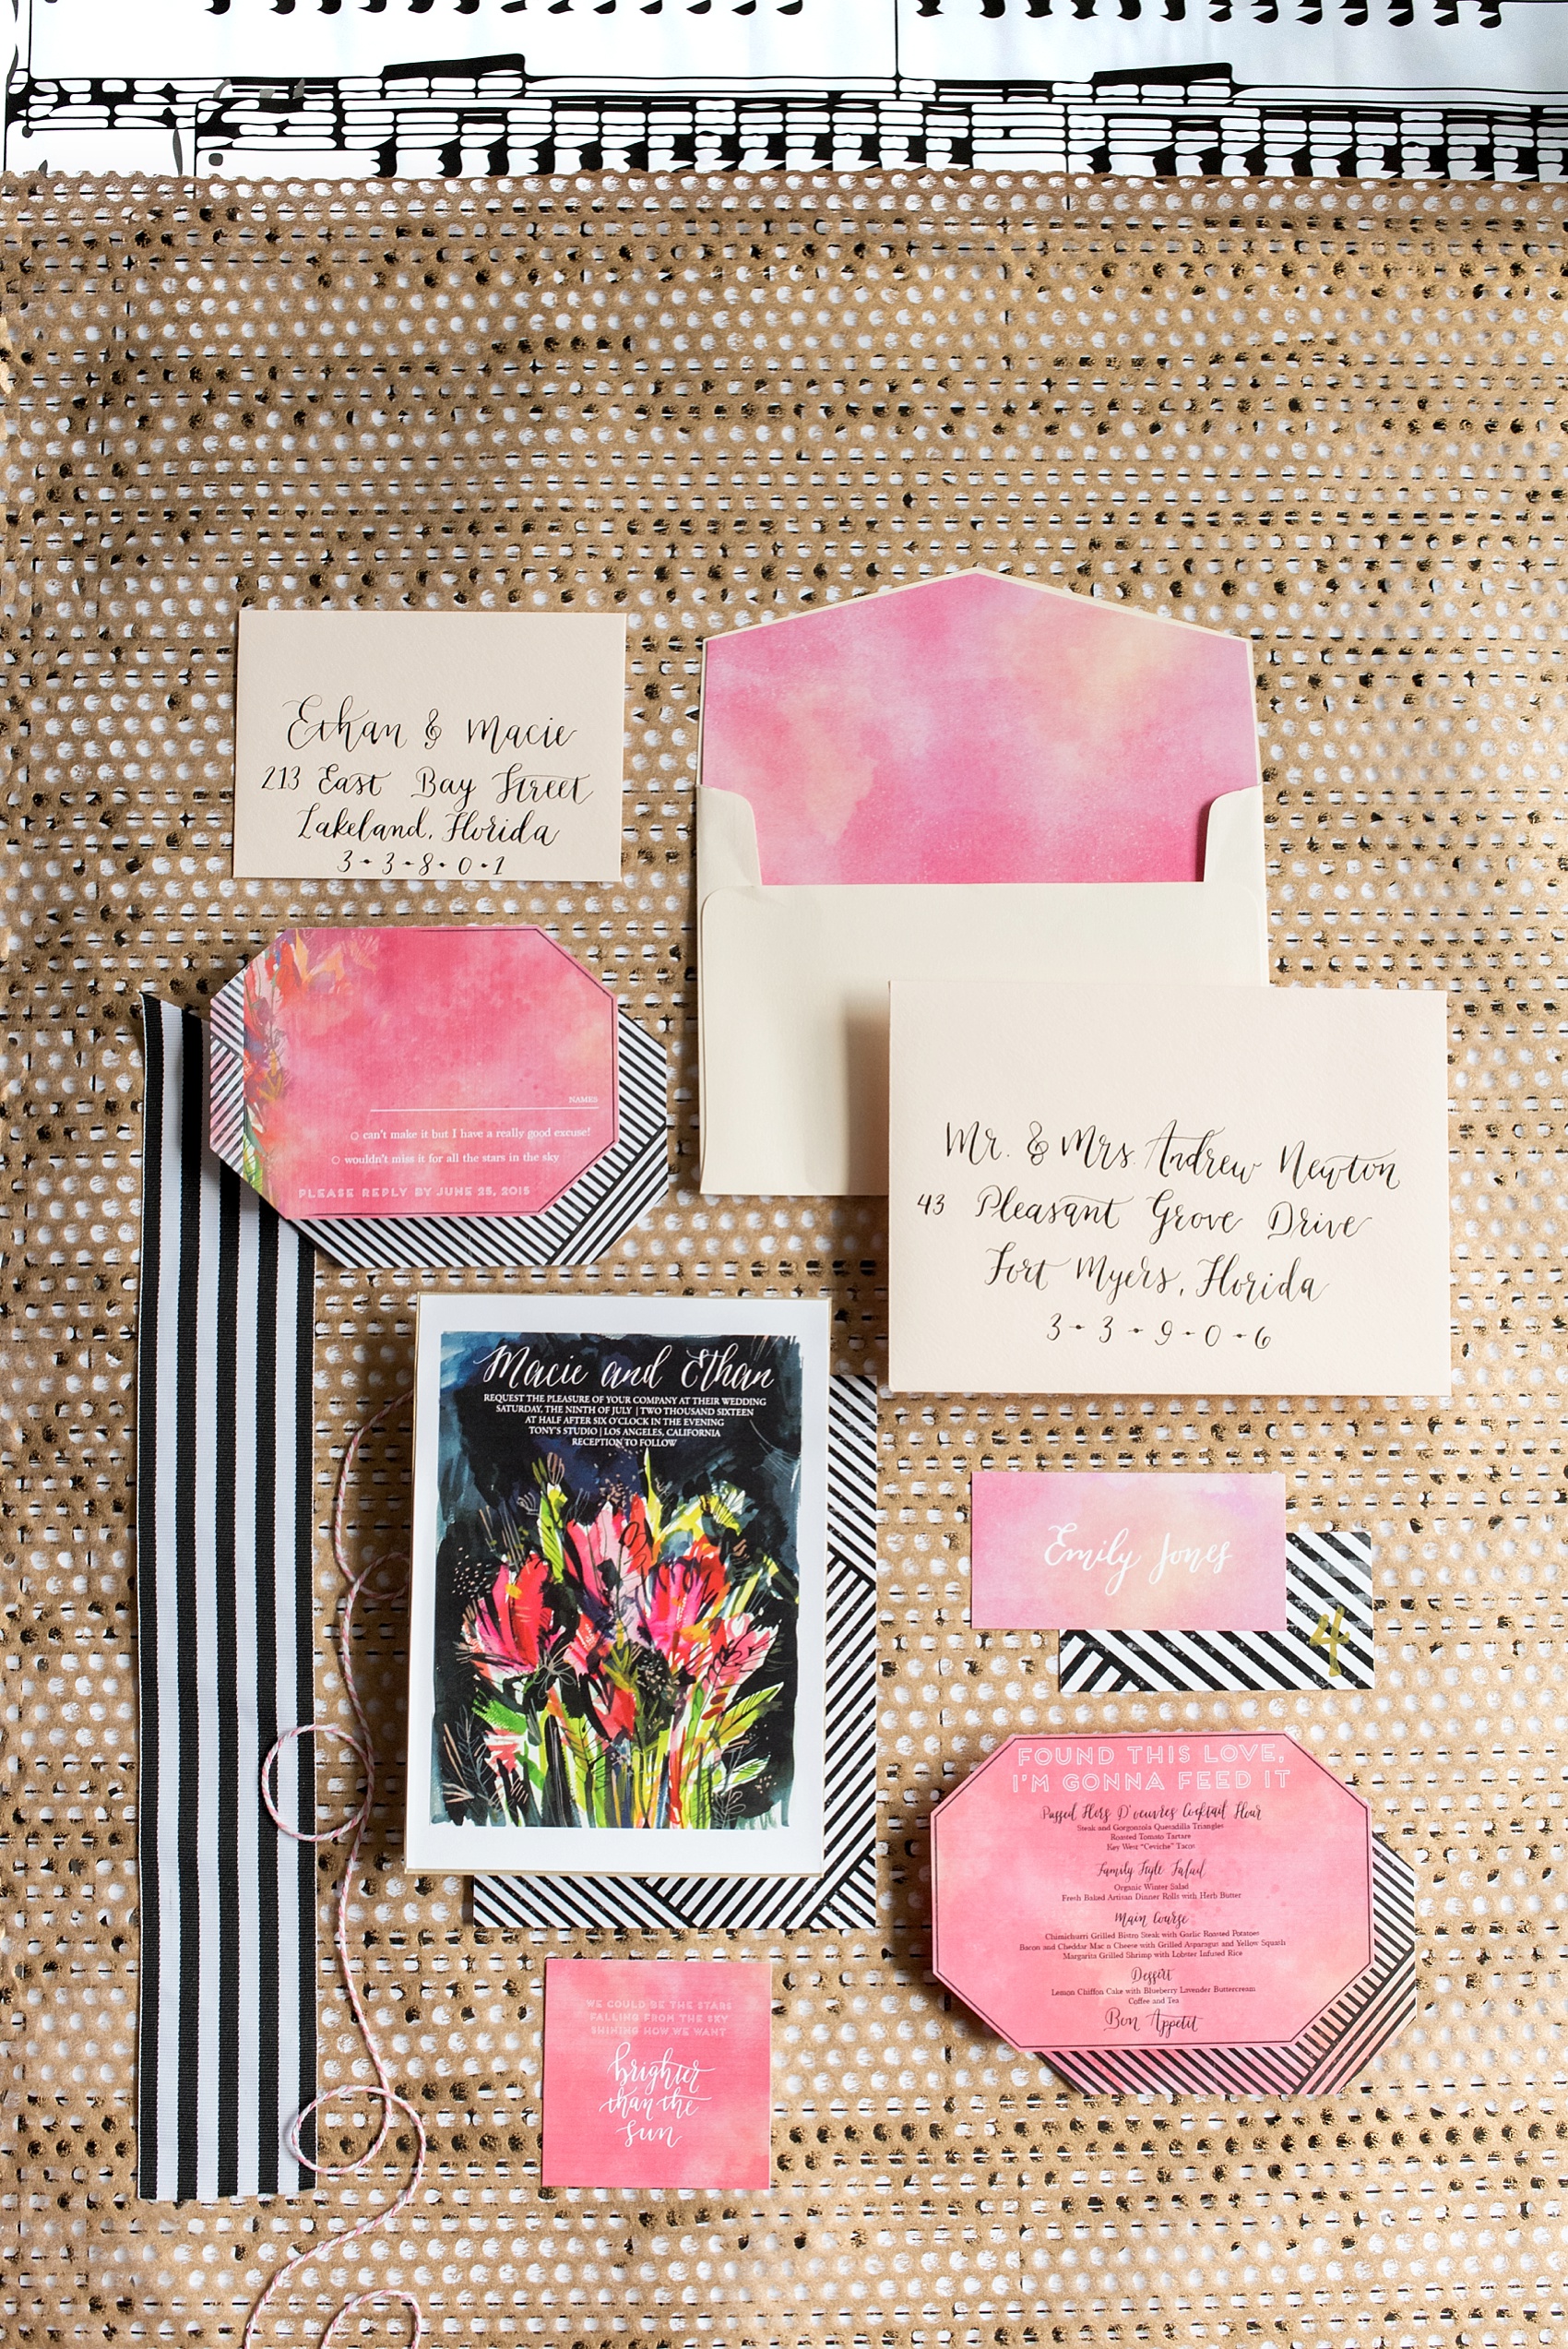 Pink and orange invitation suite with custom calligraphy. Photos by Mikkel Paige, calligraphy by Estudio Rojo.